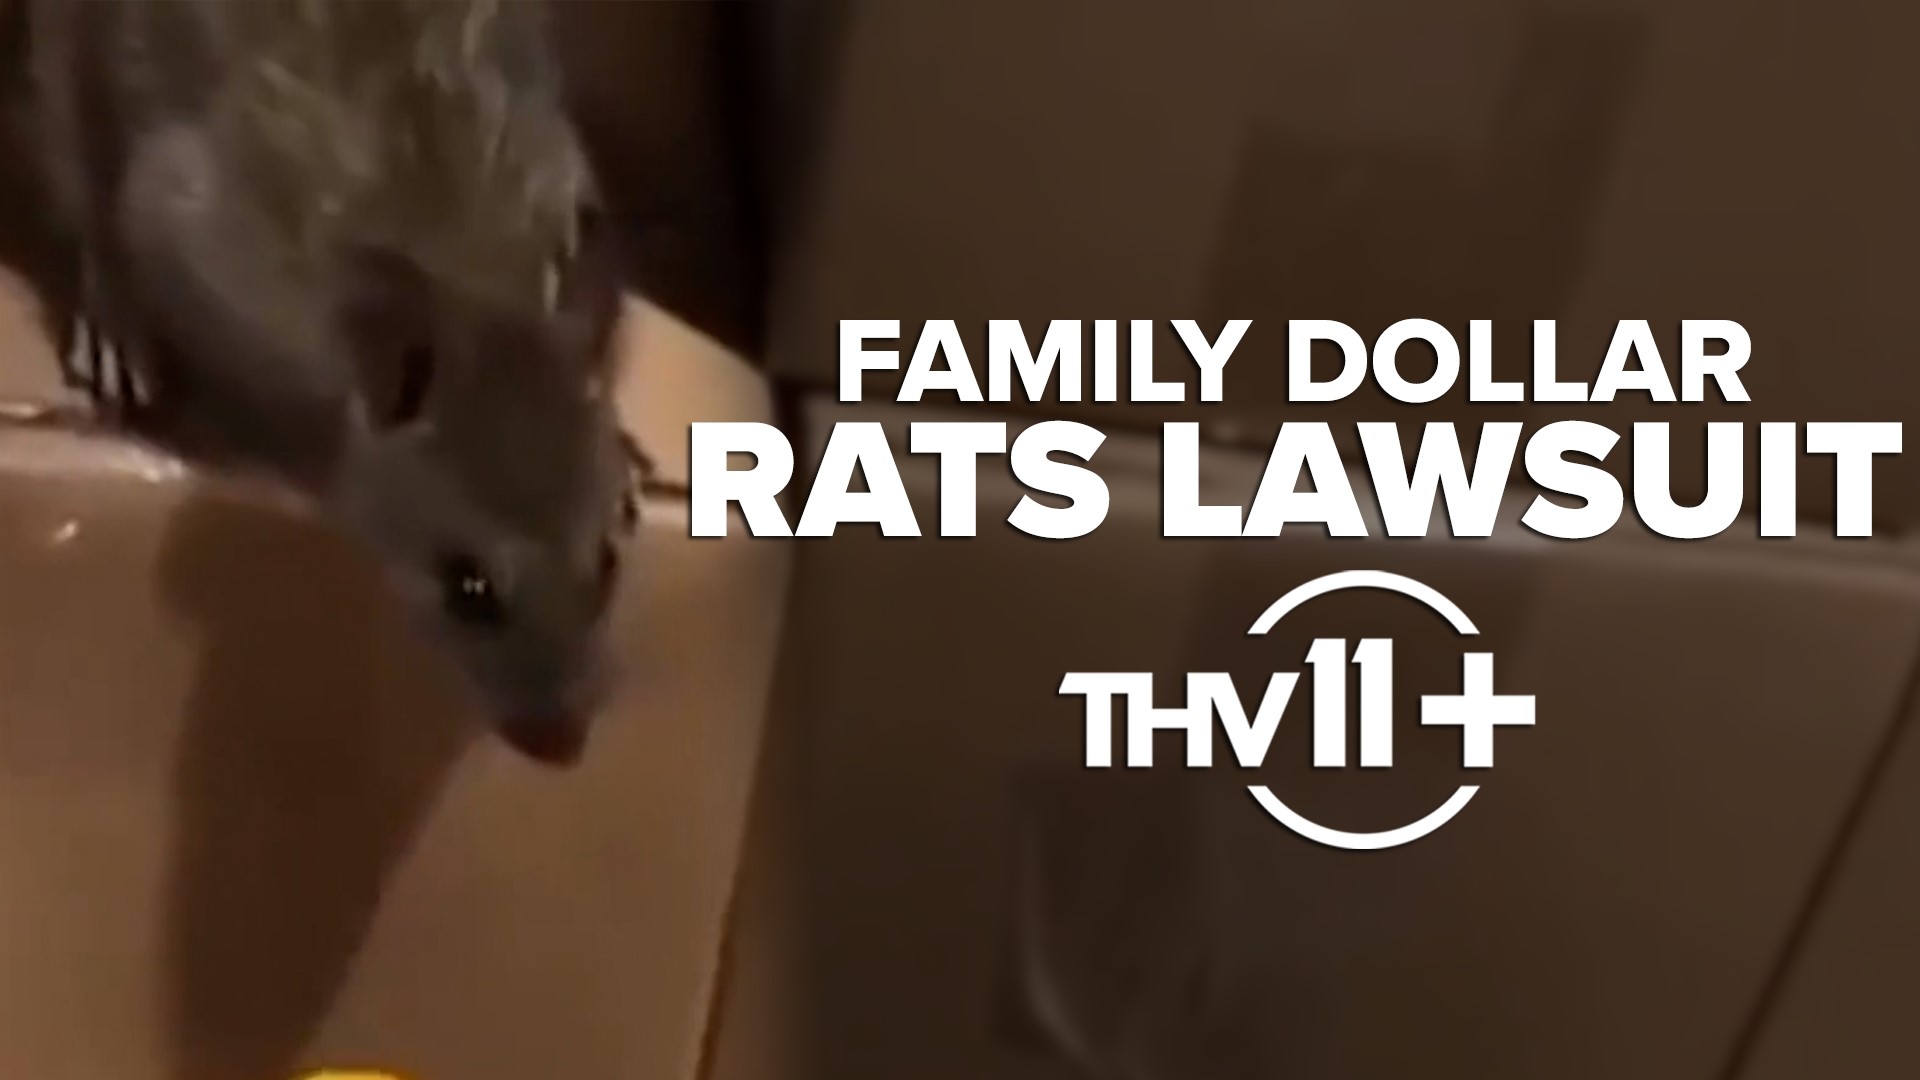 Family Dollar will pay a little over $41 million in fines after a rat infestation was discovered at a warehouse in West Memphis, Arkansas.